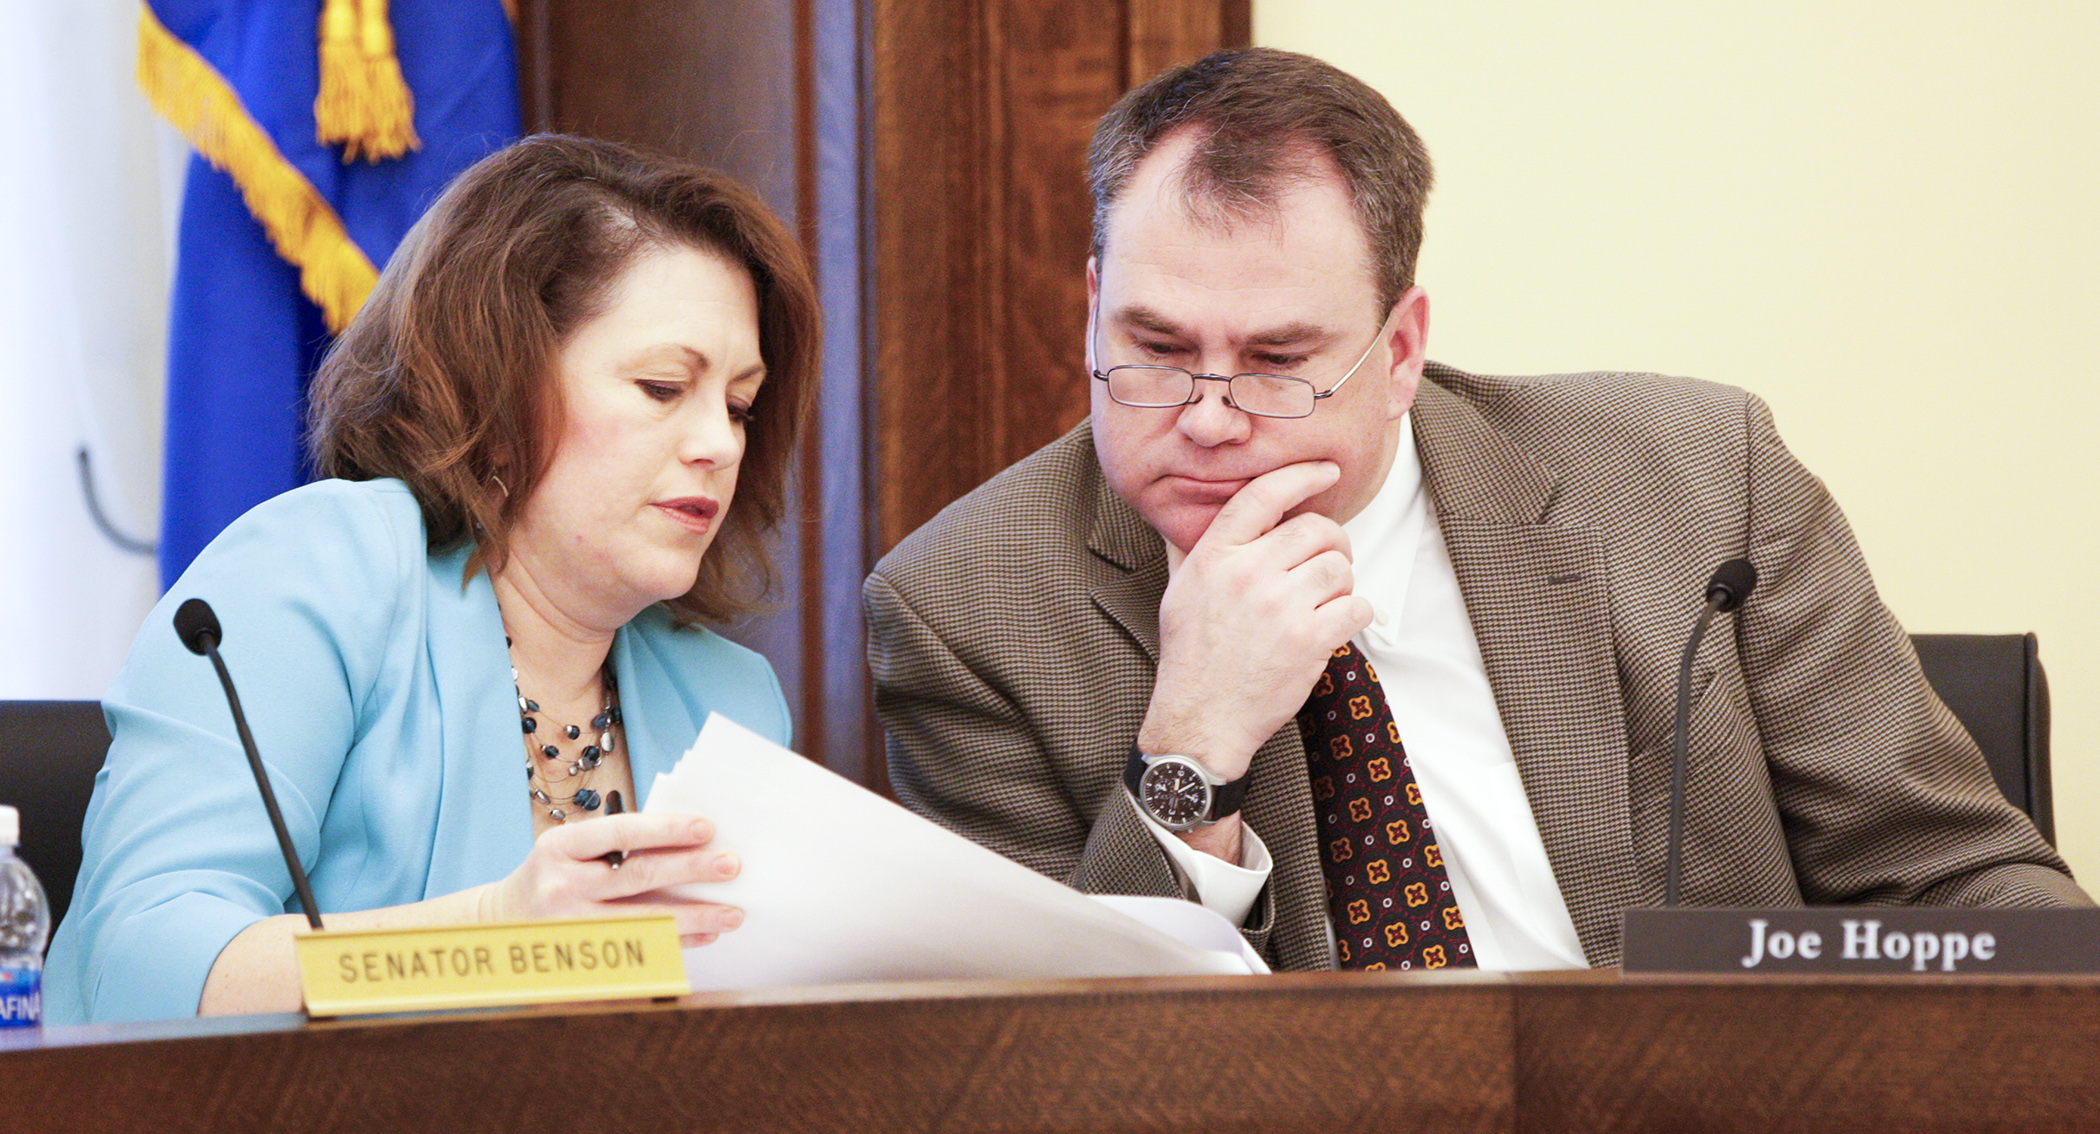 Rep. Joe Hoppe and Sen. Michelle Benson, co-chairs of the conference committee on SF1, confer as staff go through a side-by-side comparison of the House and Senate bills Jan. 24. Photo by Paul Battaglia